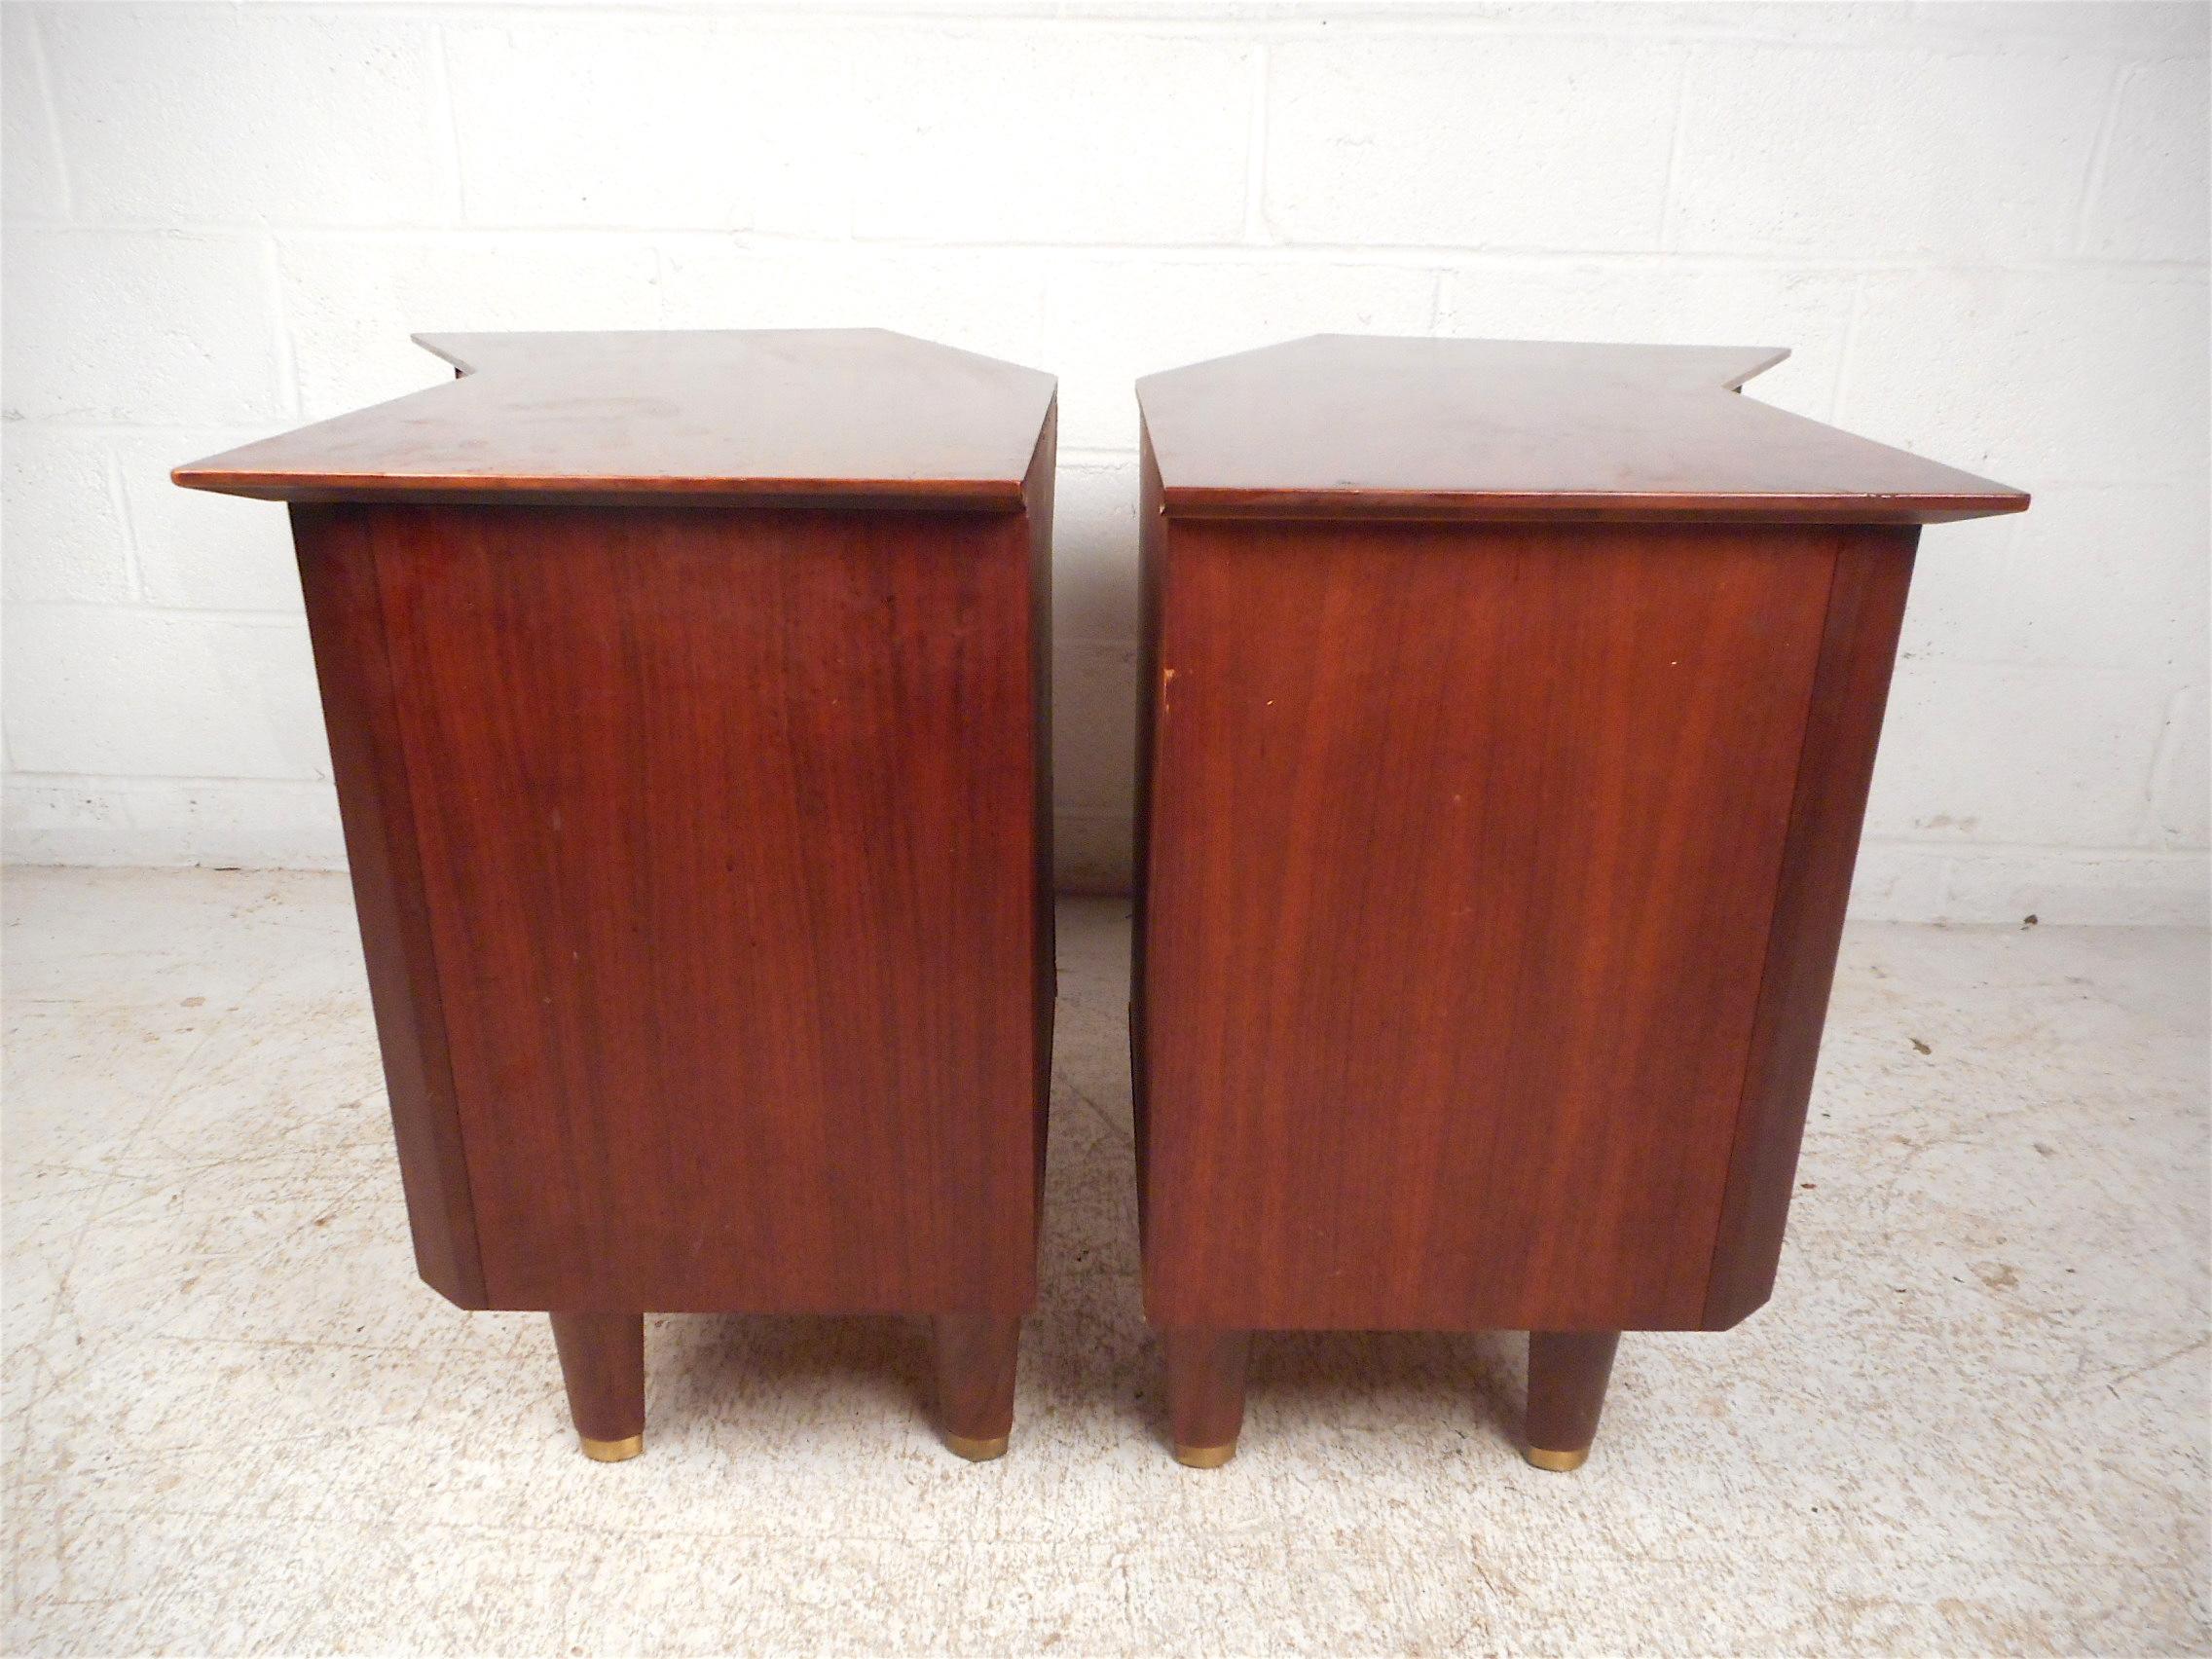 Mid-20th Century Midcentury Nightstands by Baker, a Pair